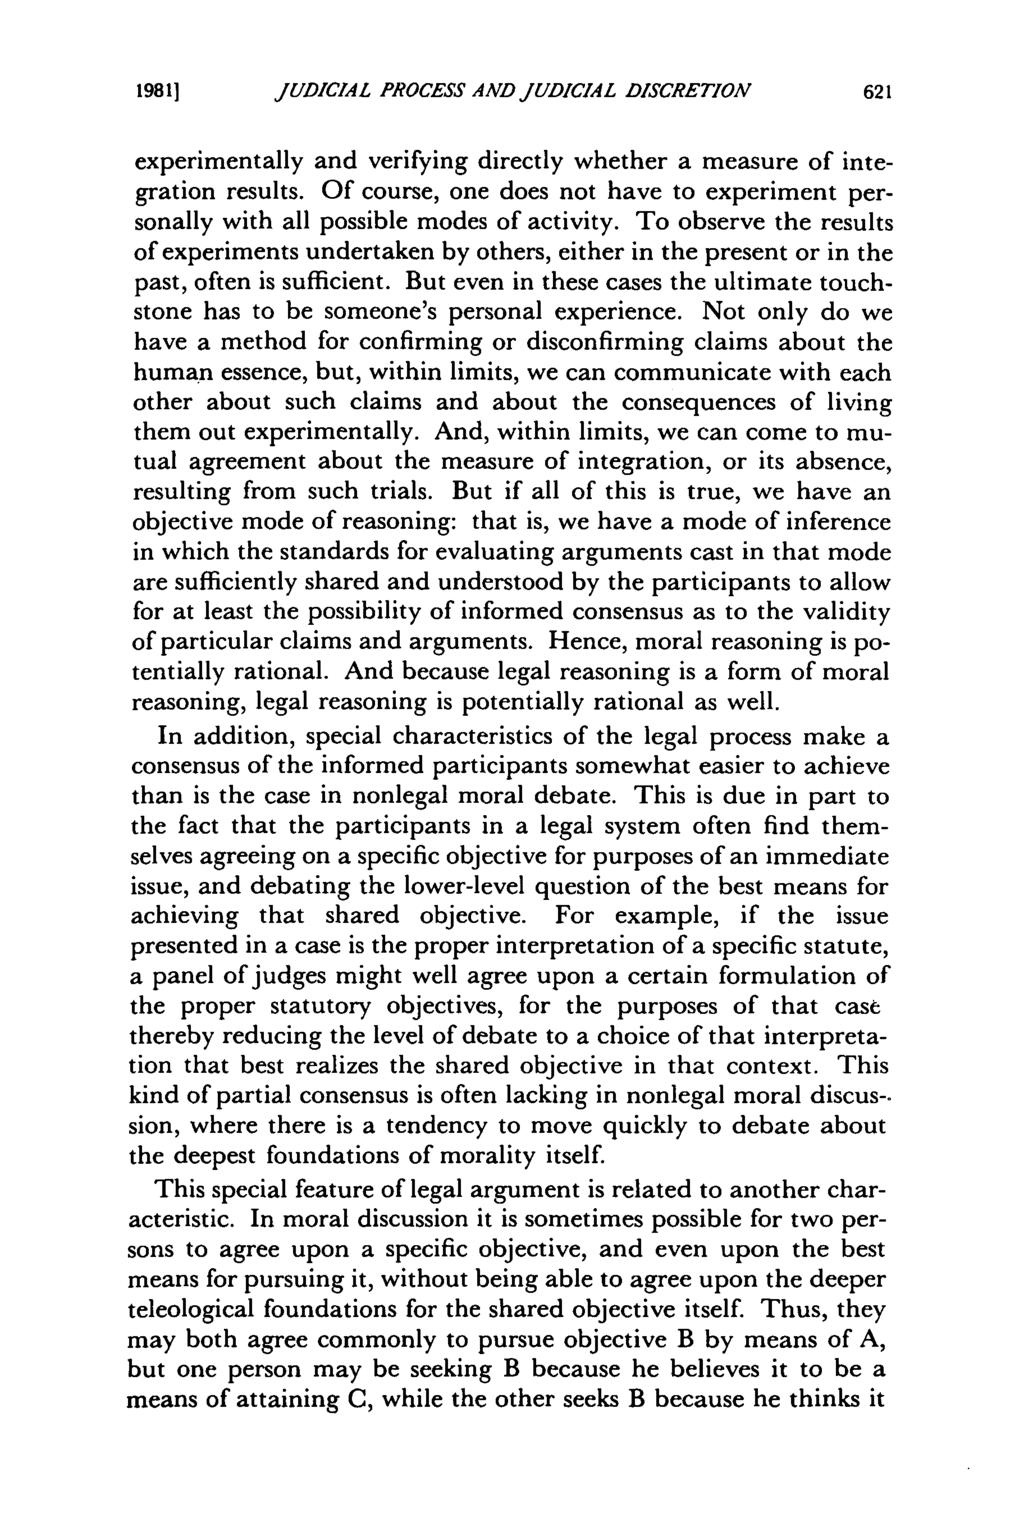 19811 Pannier: The Nature of the Judicial Process and Judicial Discretion JUDICIAL PROCESS AND JUDICIAL DISCRETION experimentally and verifying directly whether a measure of integration results.